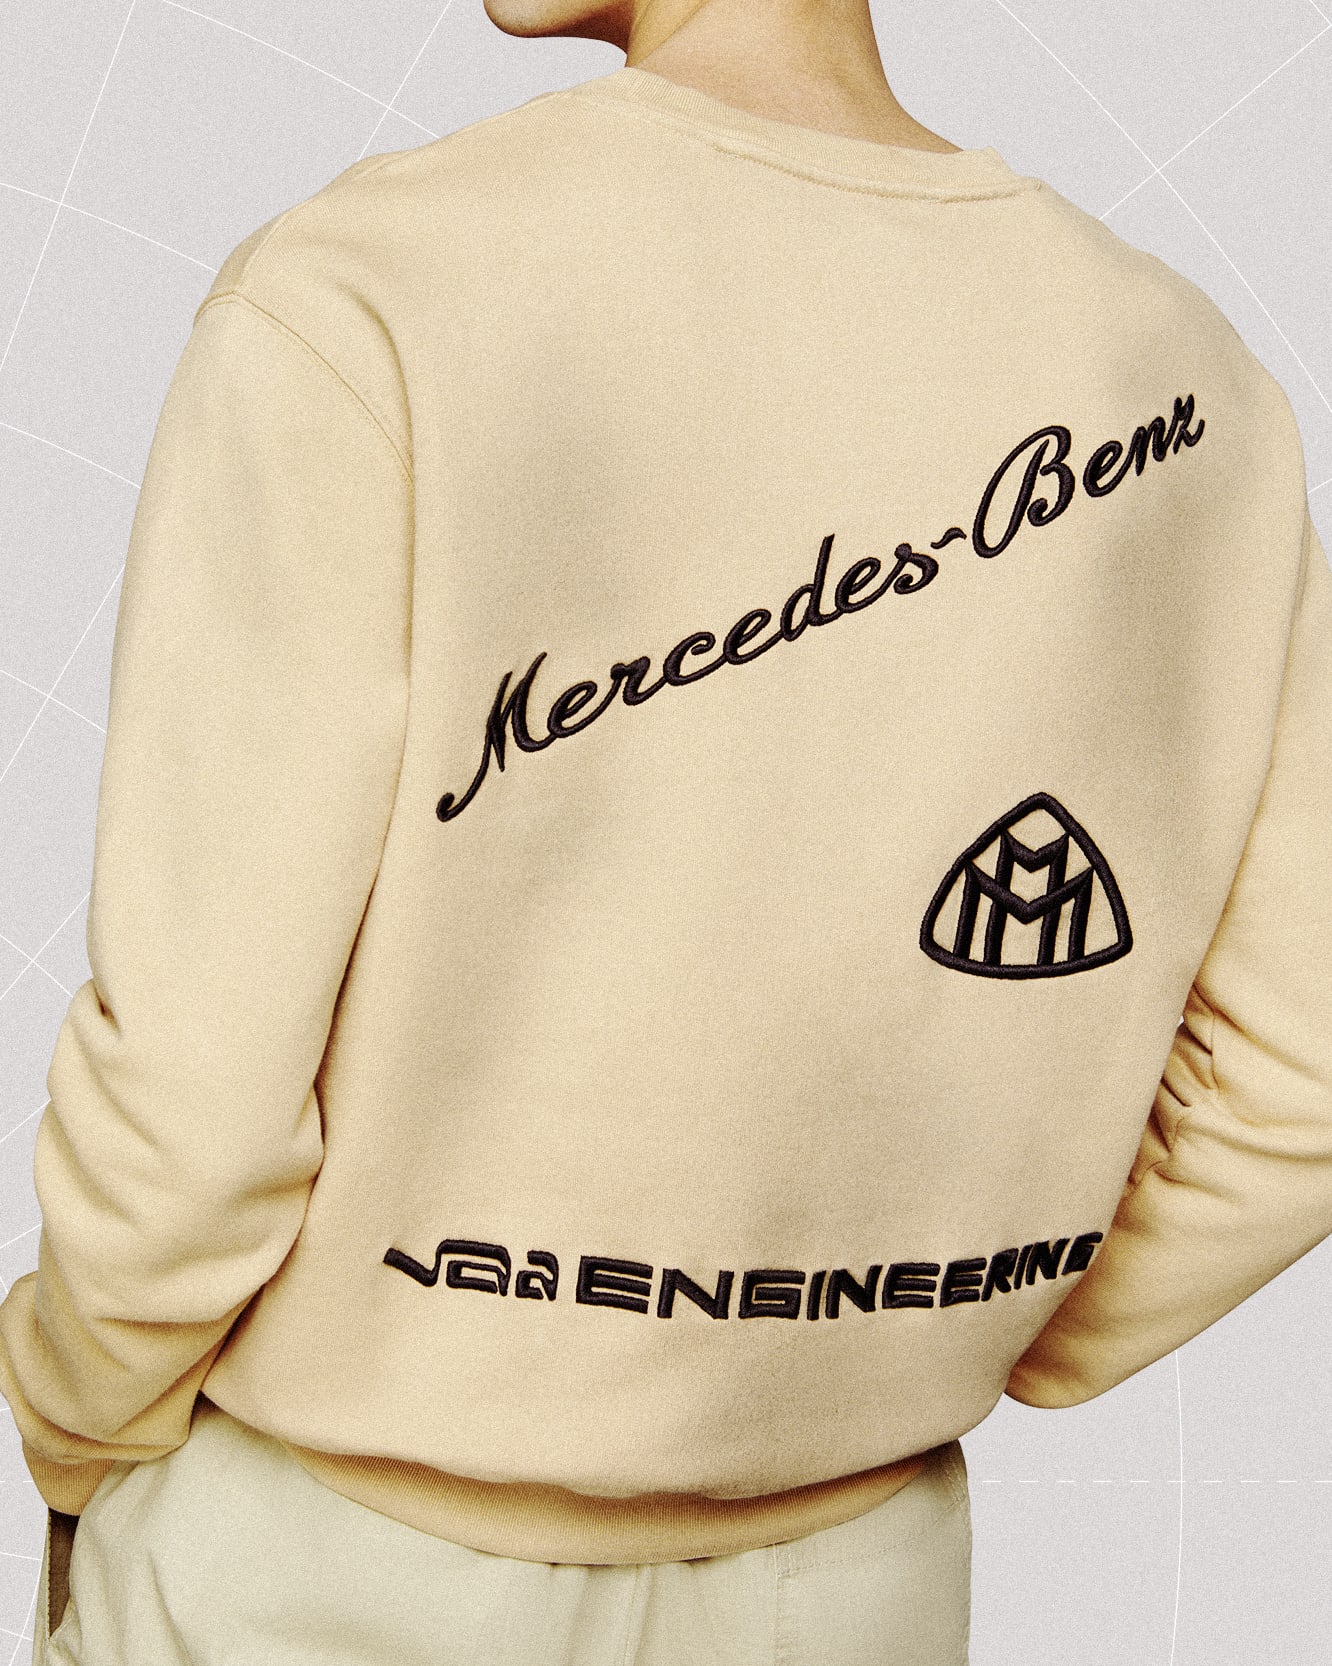 Project MAYBACH: Off-White Reveals Virgil Abloh x Mercedes Collection